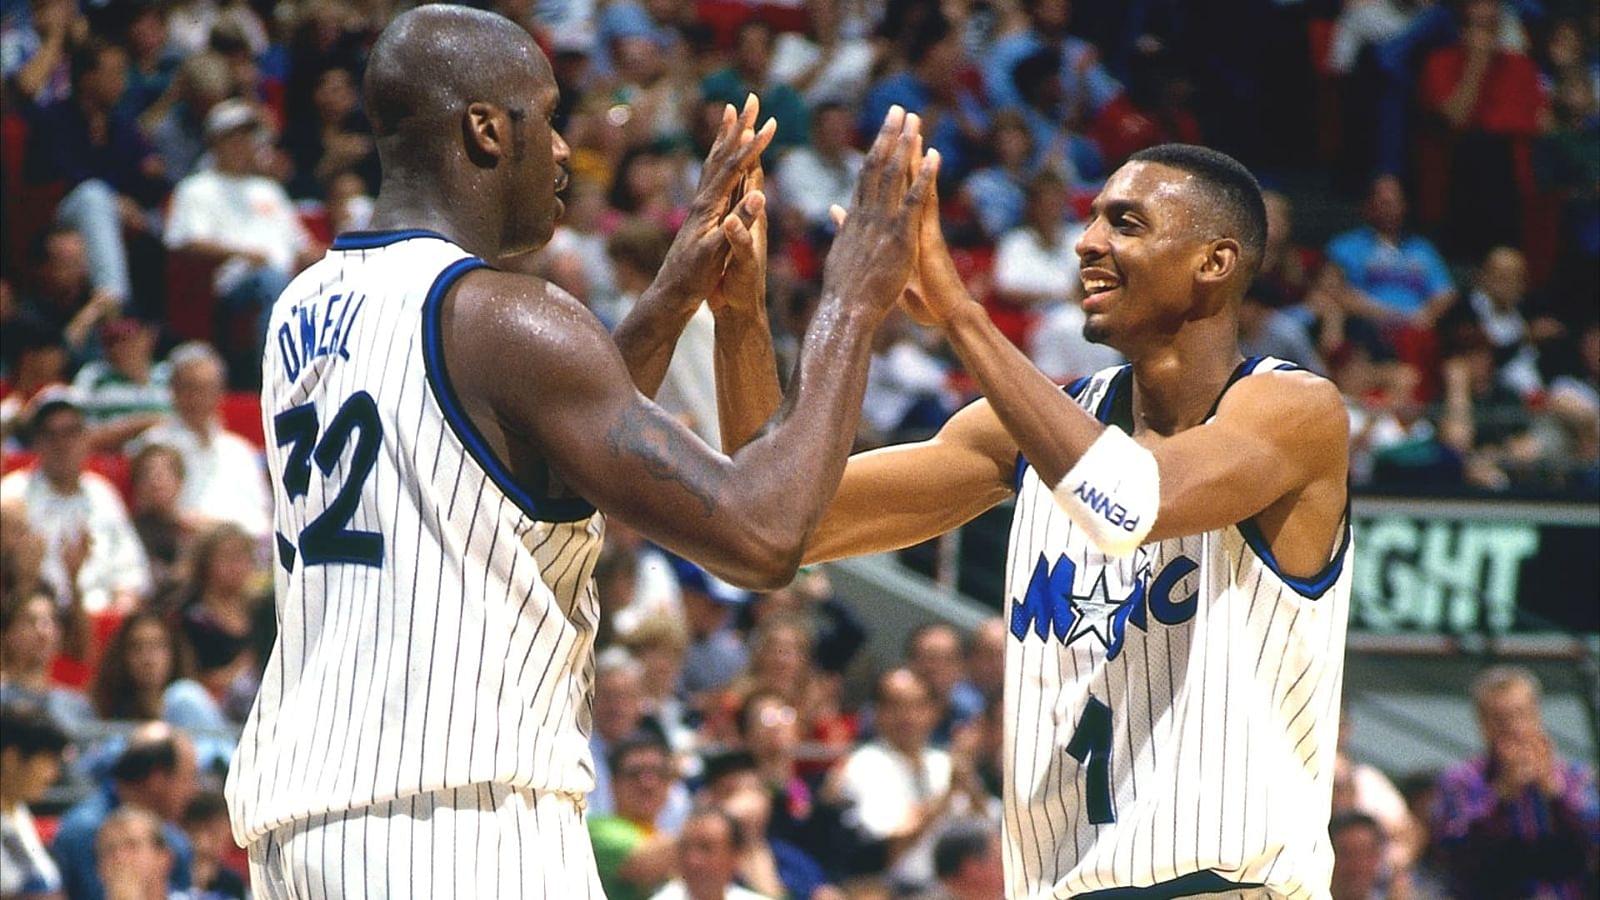 Shaquille O’Neal, who had to leave Lakers because of The Black Mamba believes “Penny Hardaway was the Kobe before Kobe Bryant”